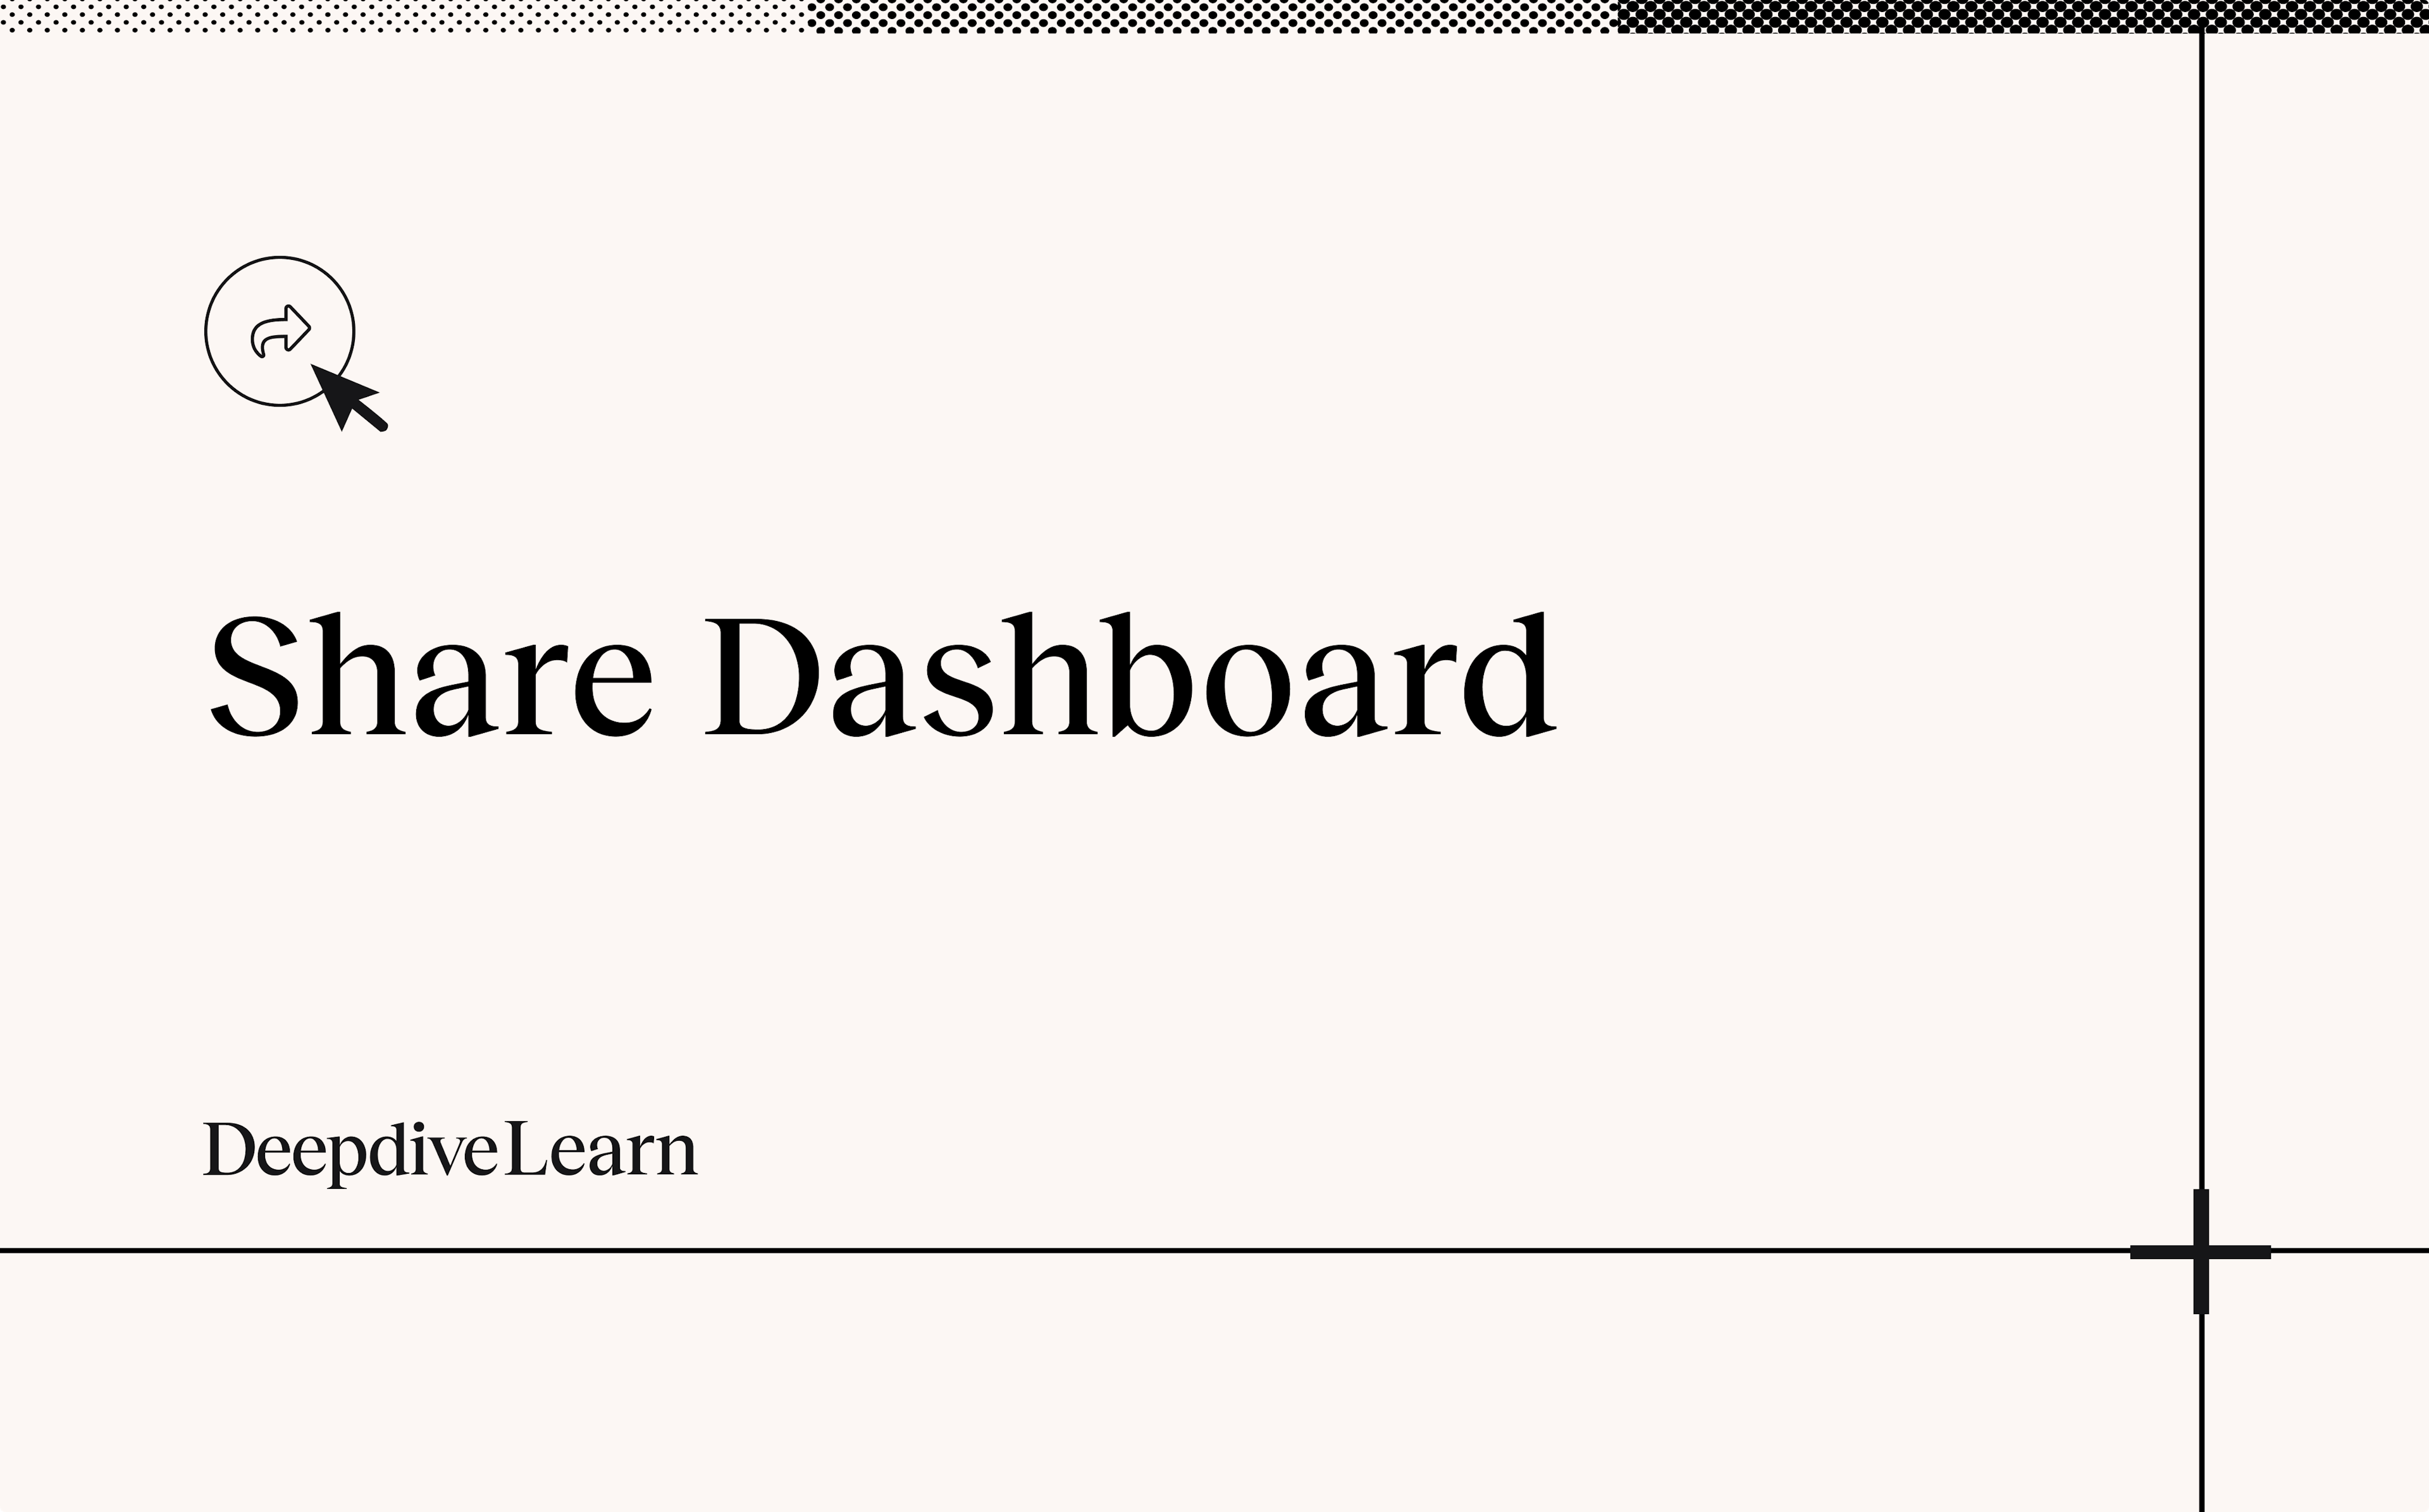 Share dashboard by Deepdive Learn